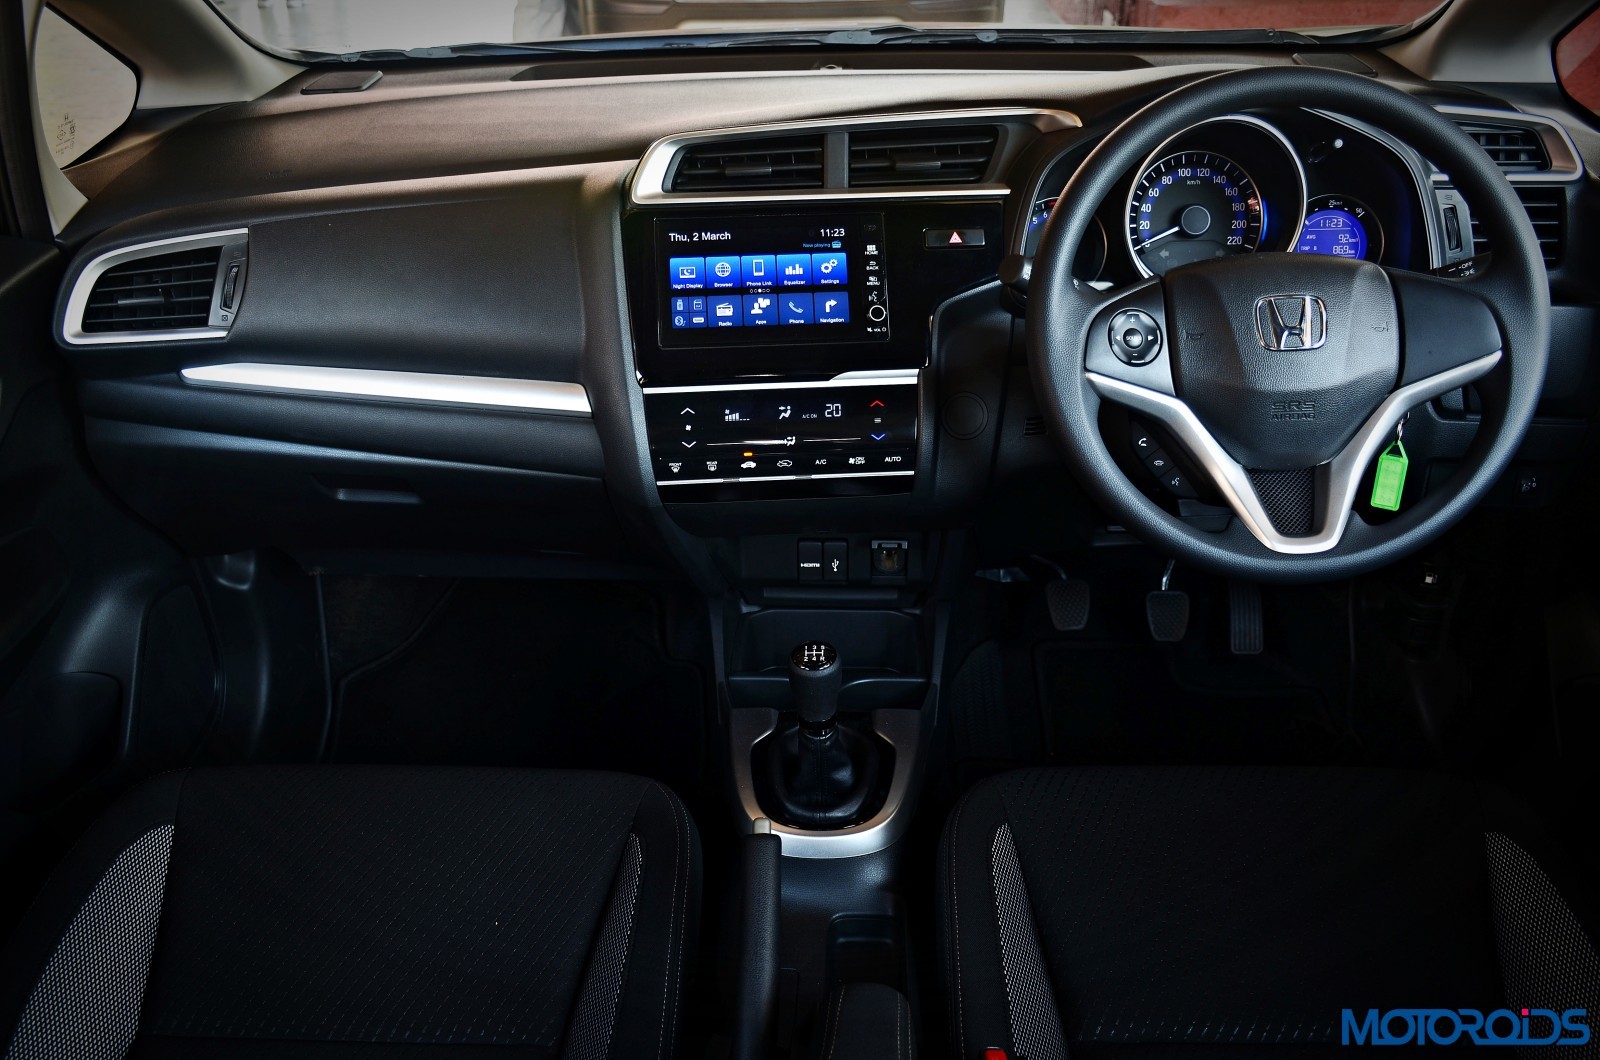 New Honda Wr V India Review Price Specs Mileage Image Gallery Interior And Features Motoroids